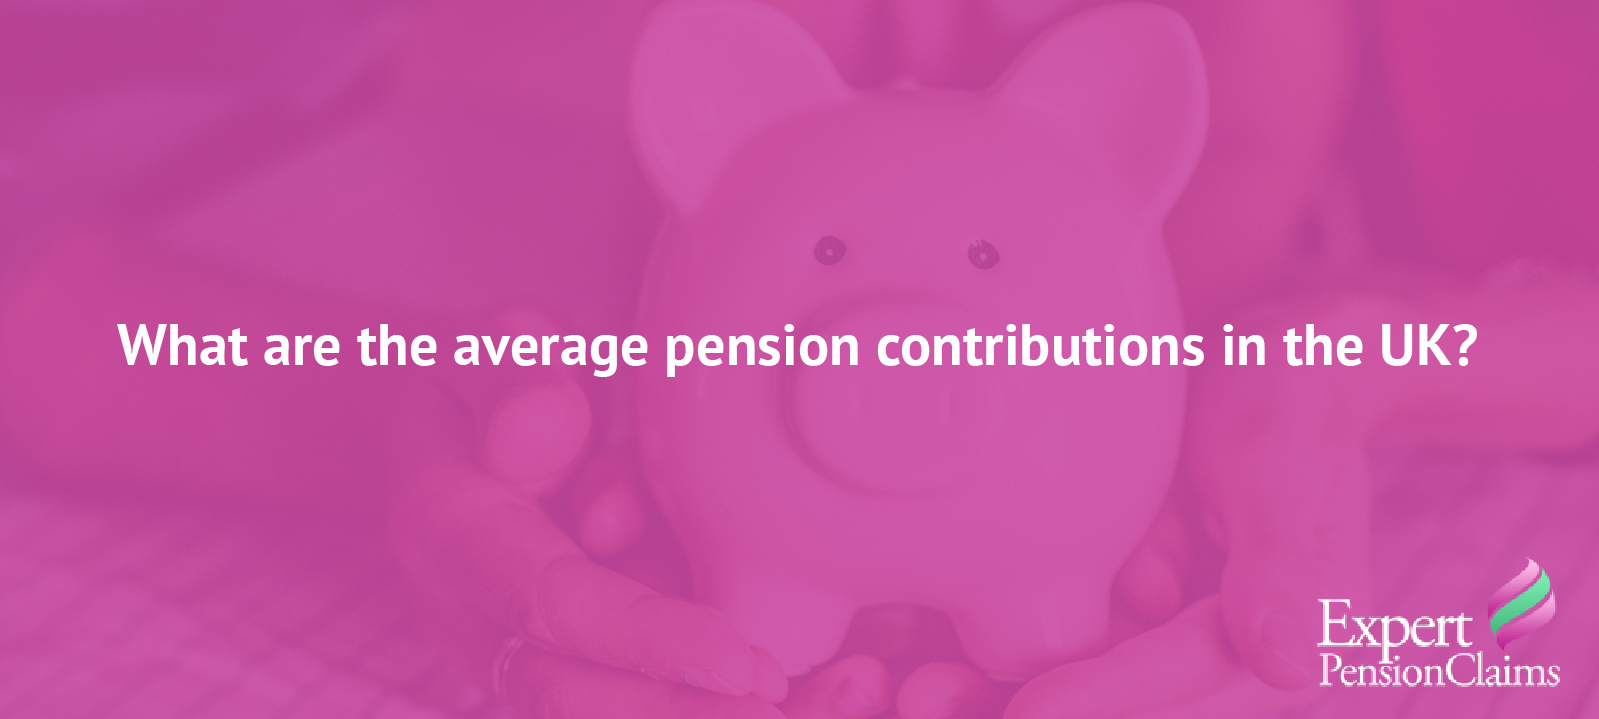 What are the average pension contributions in the UK?